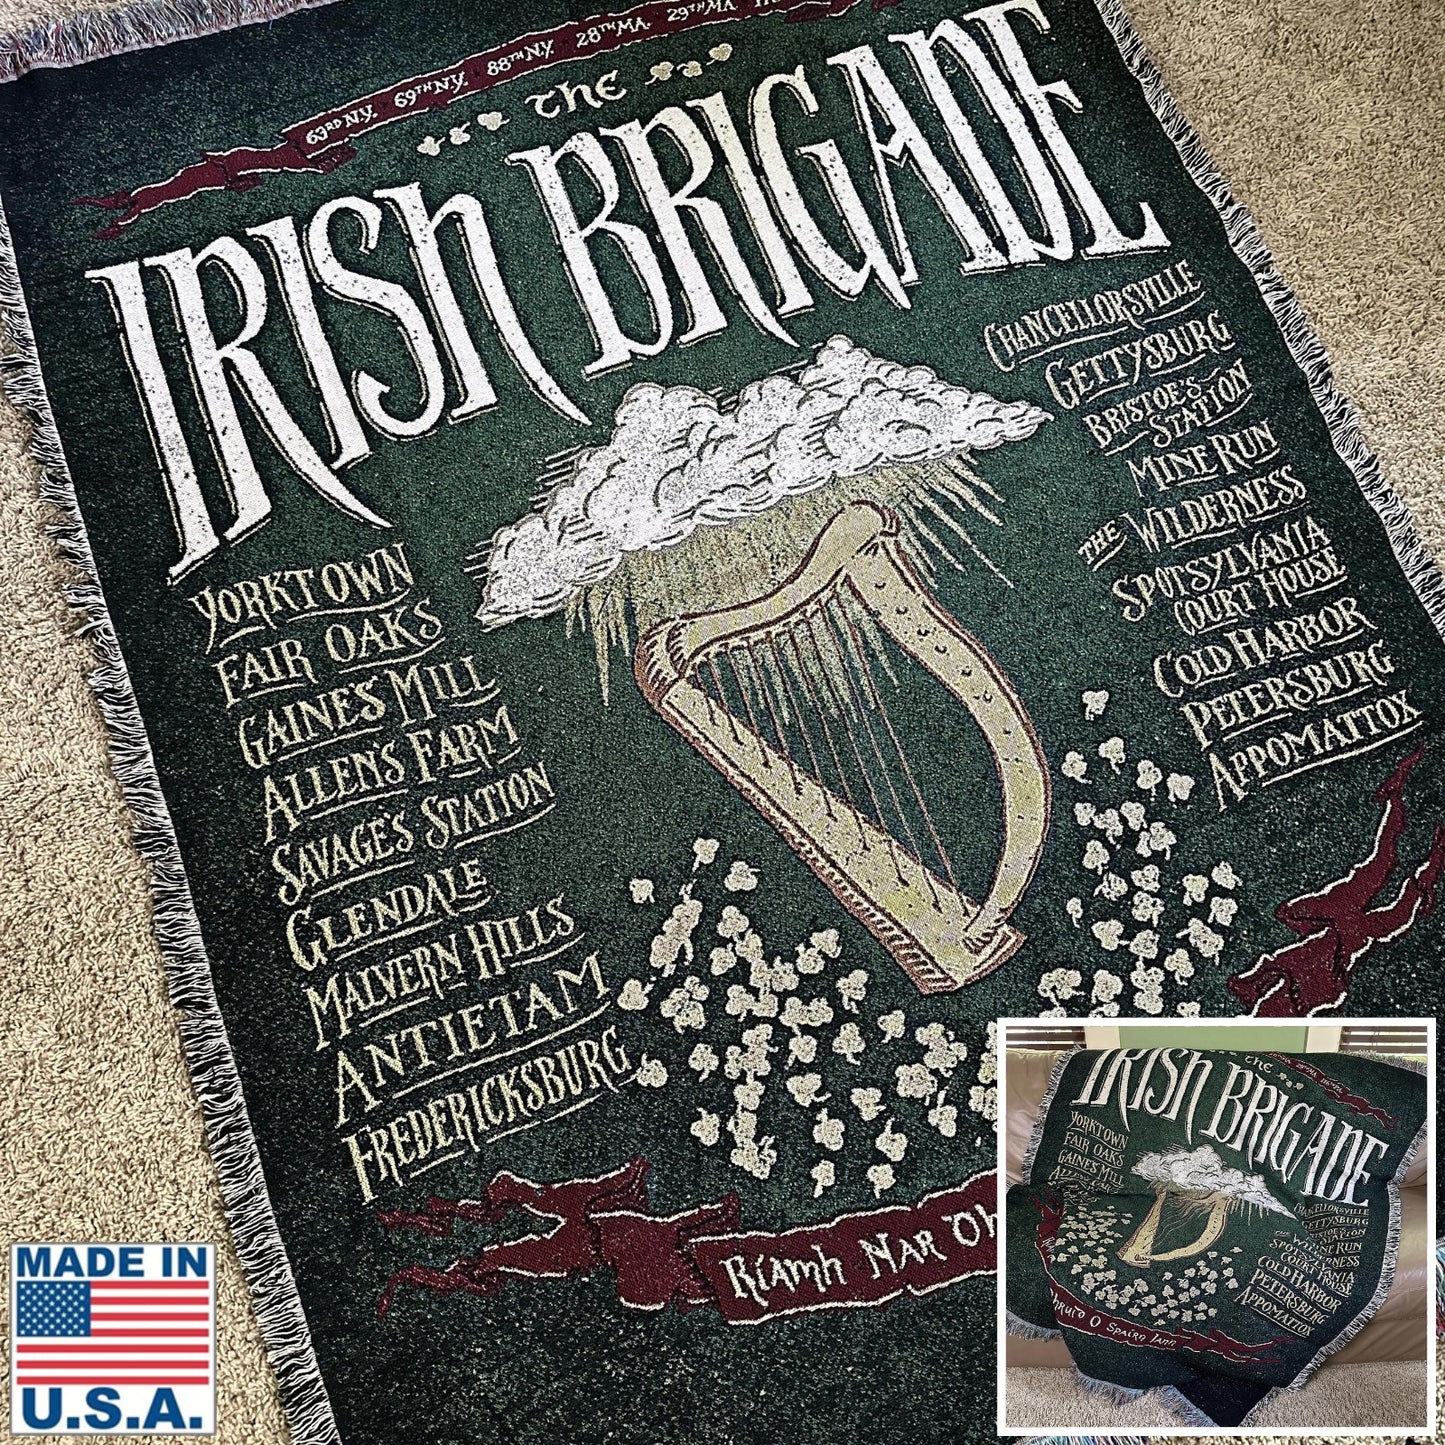 The Civil War "Irish Brigade" woven blanket — Made in America from The History List store